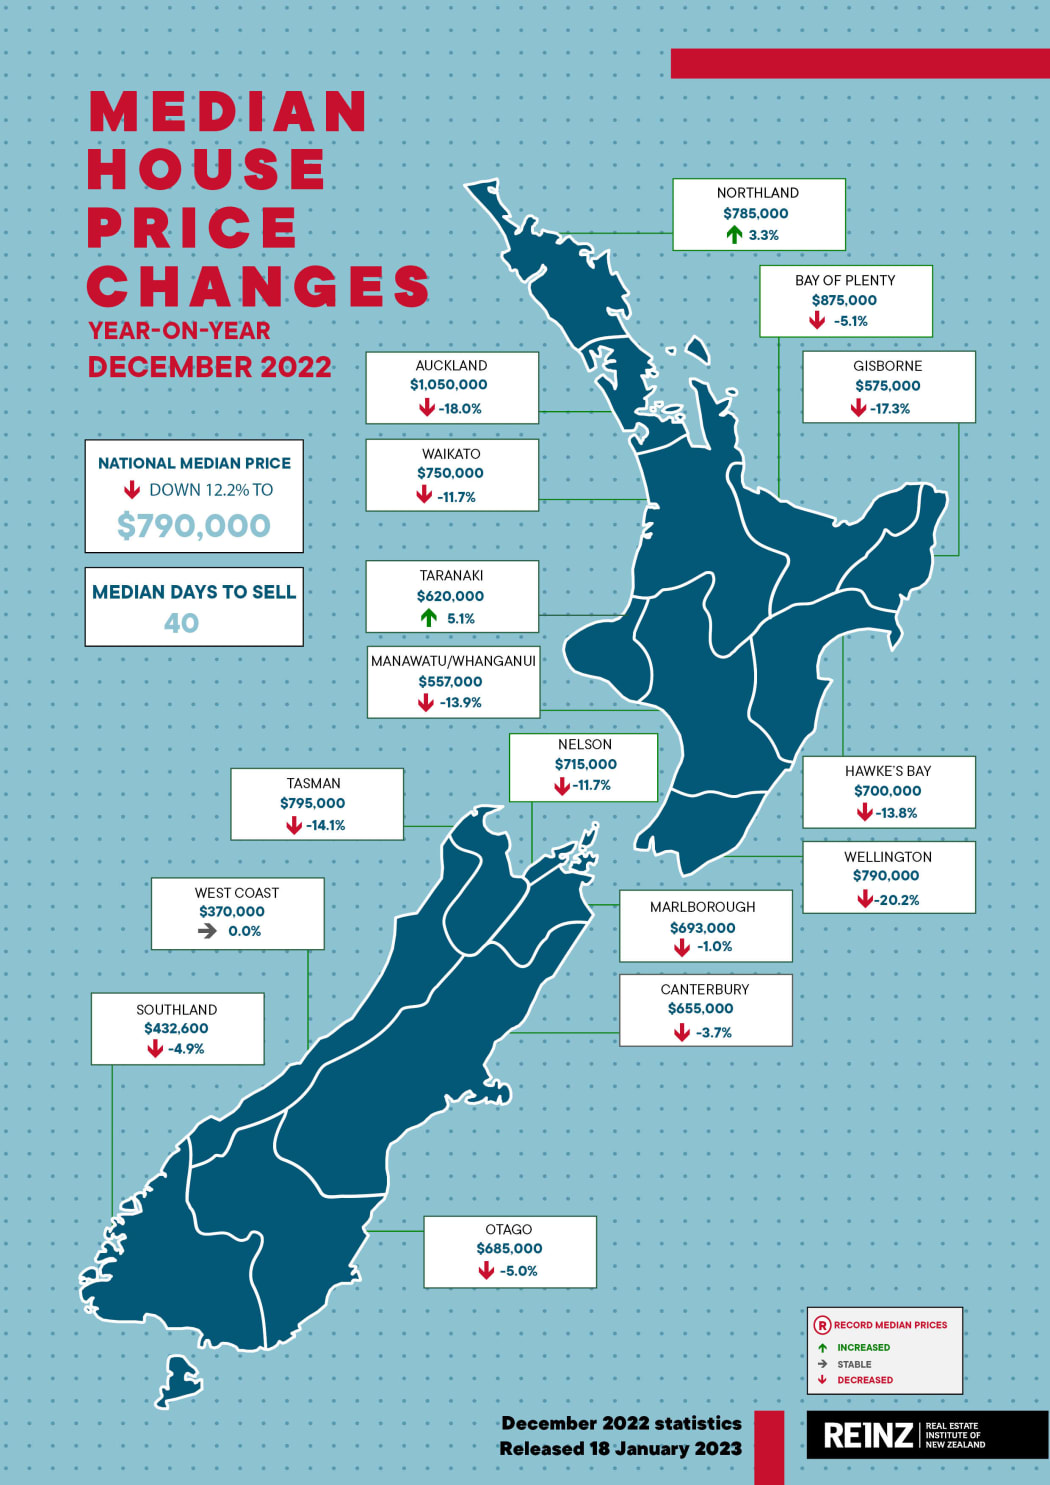 A map of New Zealand, showing house price changes in the past year.